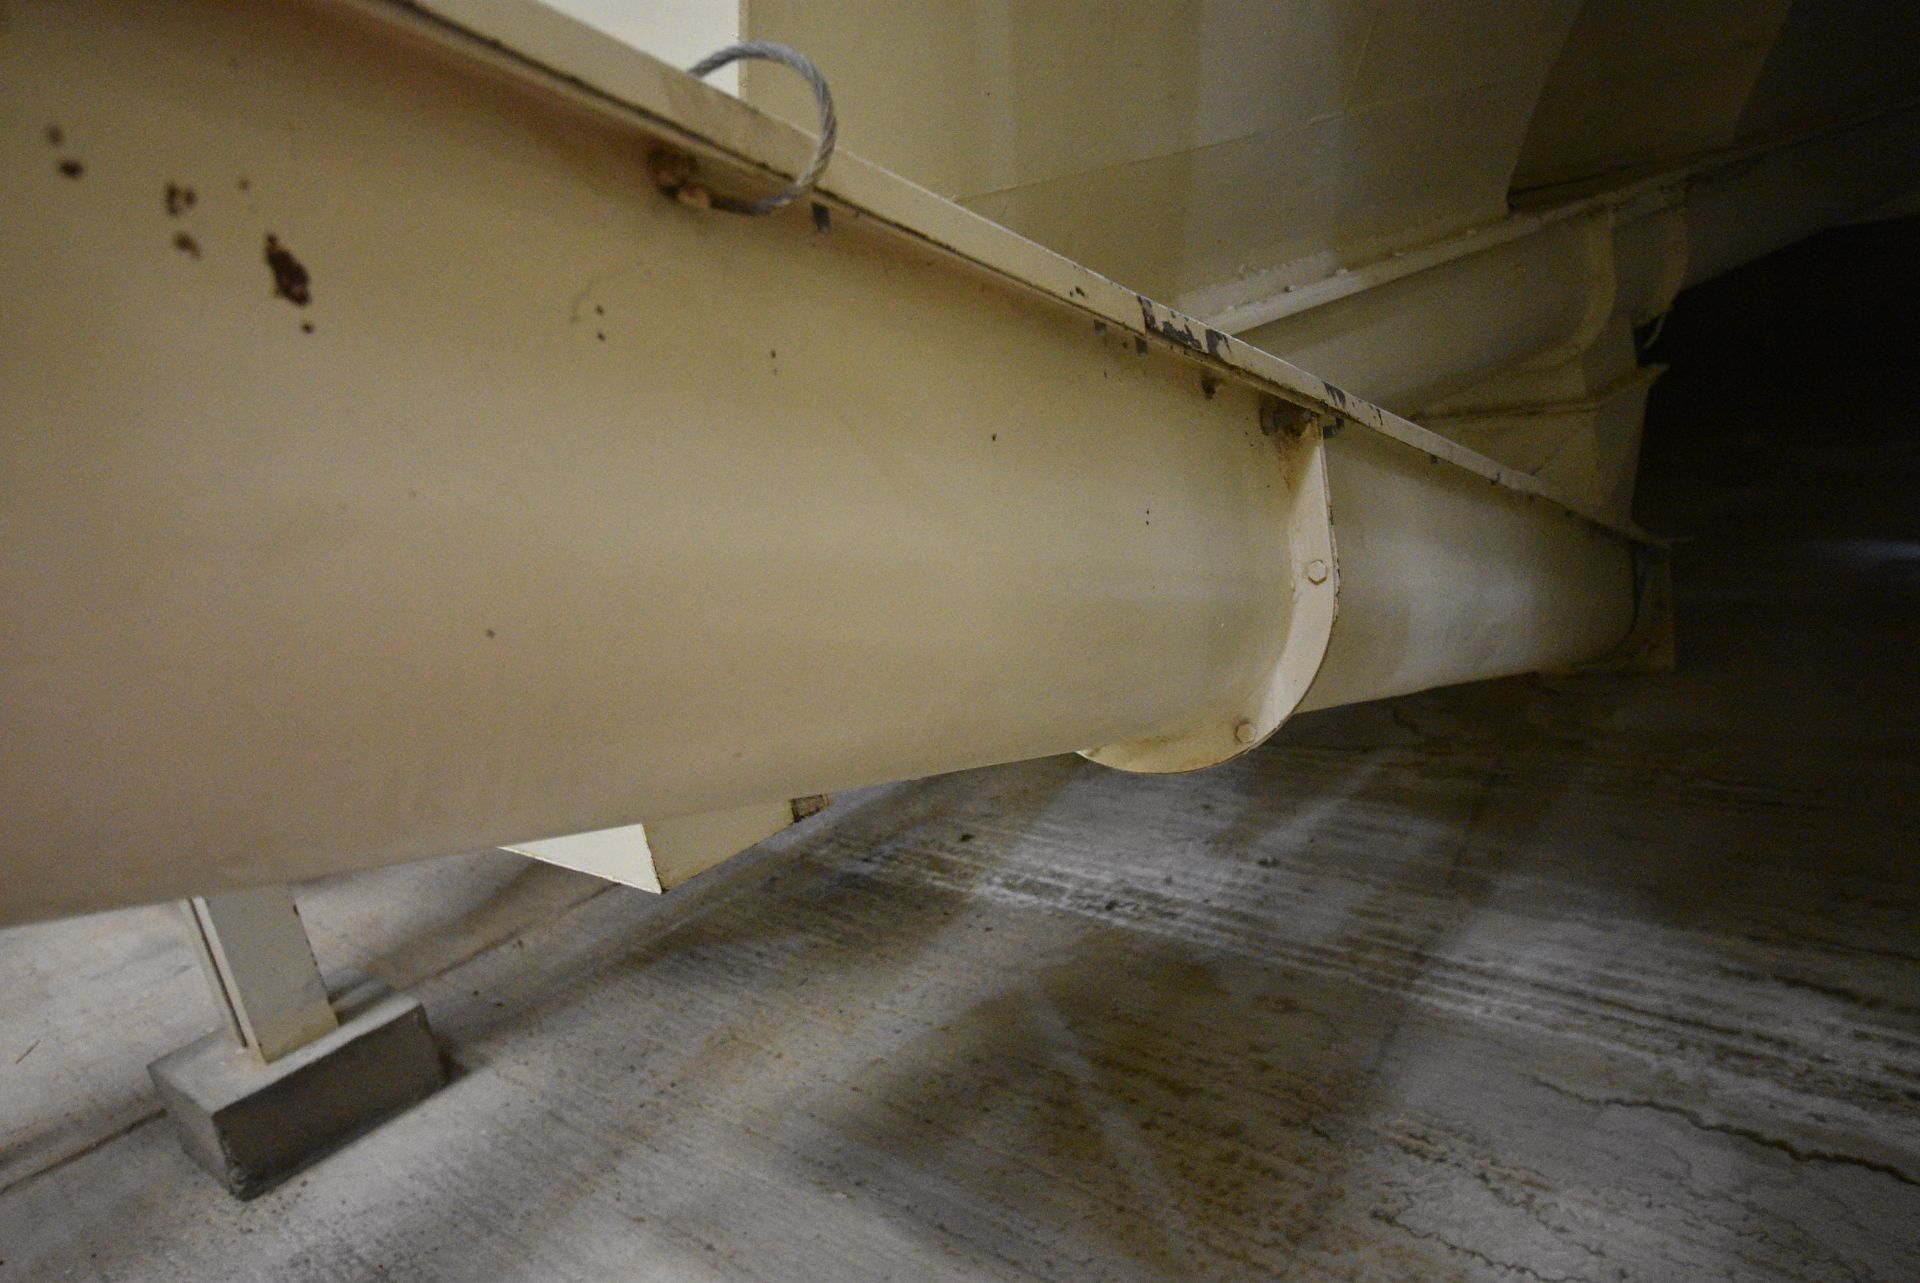 250mm dia. Inclined Screw Conveyor, approx. 7m lon - Image 2 of 4